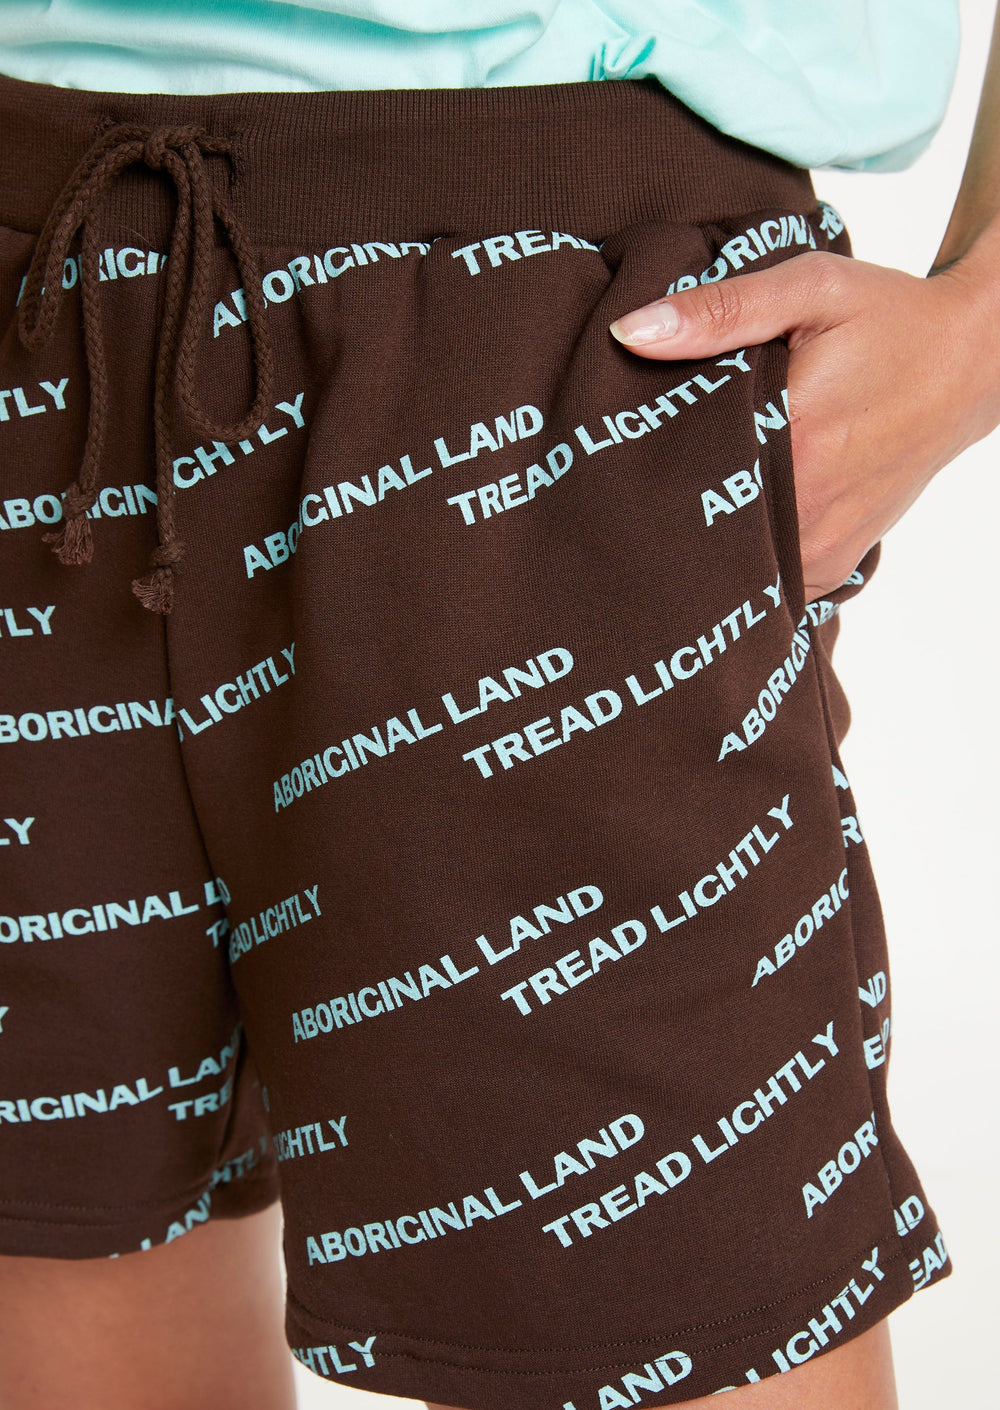 Clothing The Gaps. Blue Tread Lightly shorts. Brown shorts with repeating pattern all over crew of the words 'Aboriginal Land Tread Lightly' text in a light blue colour. Includes solid brown elastic waist with brown drawstrings and has 2 deep pockets on both sides.